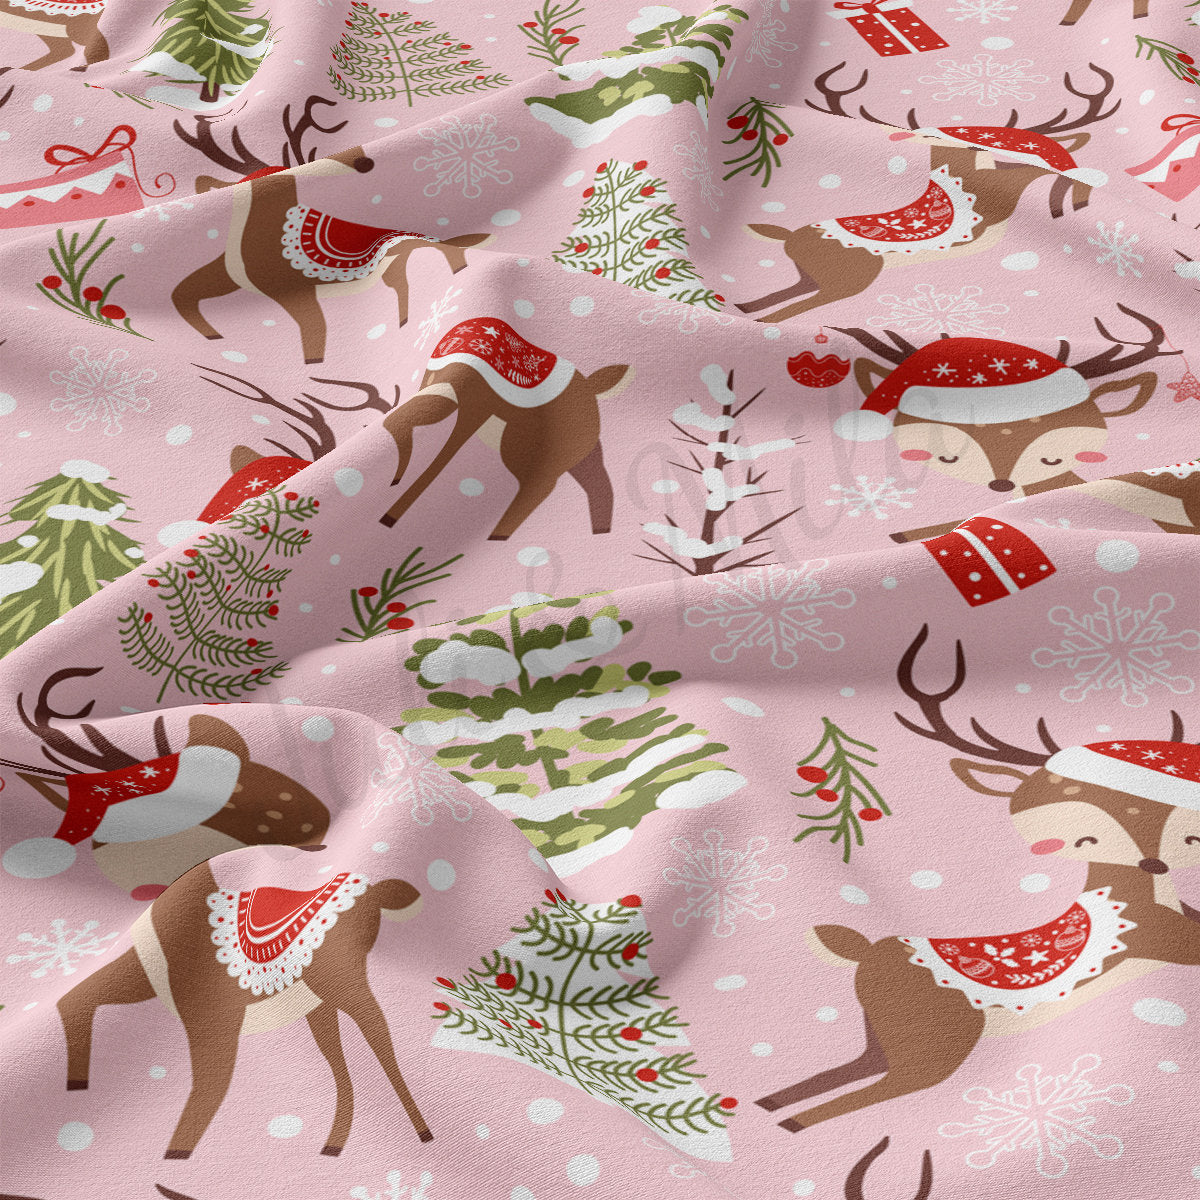 Christmas DBP Fabric Double Brushed Polyester Fabric by the Yard DBP Jersey Stretchy Soft Polyester Stretch Fabric DBP2182